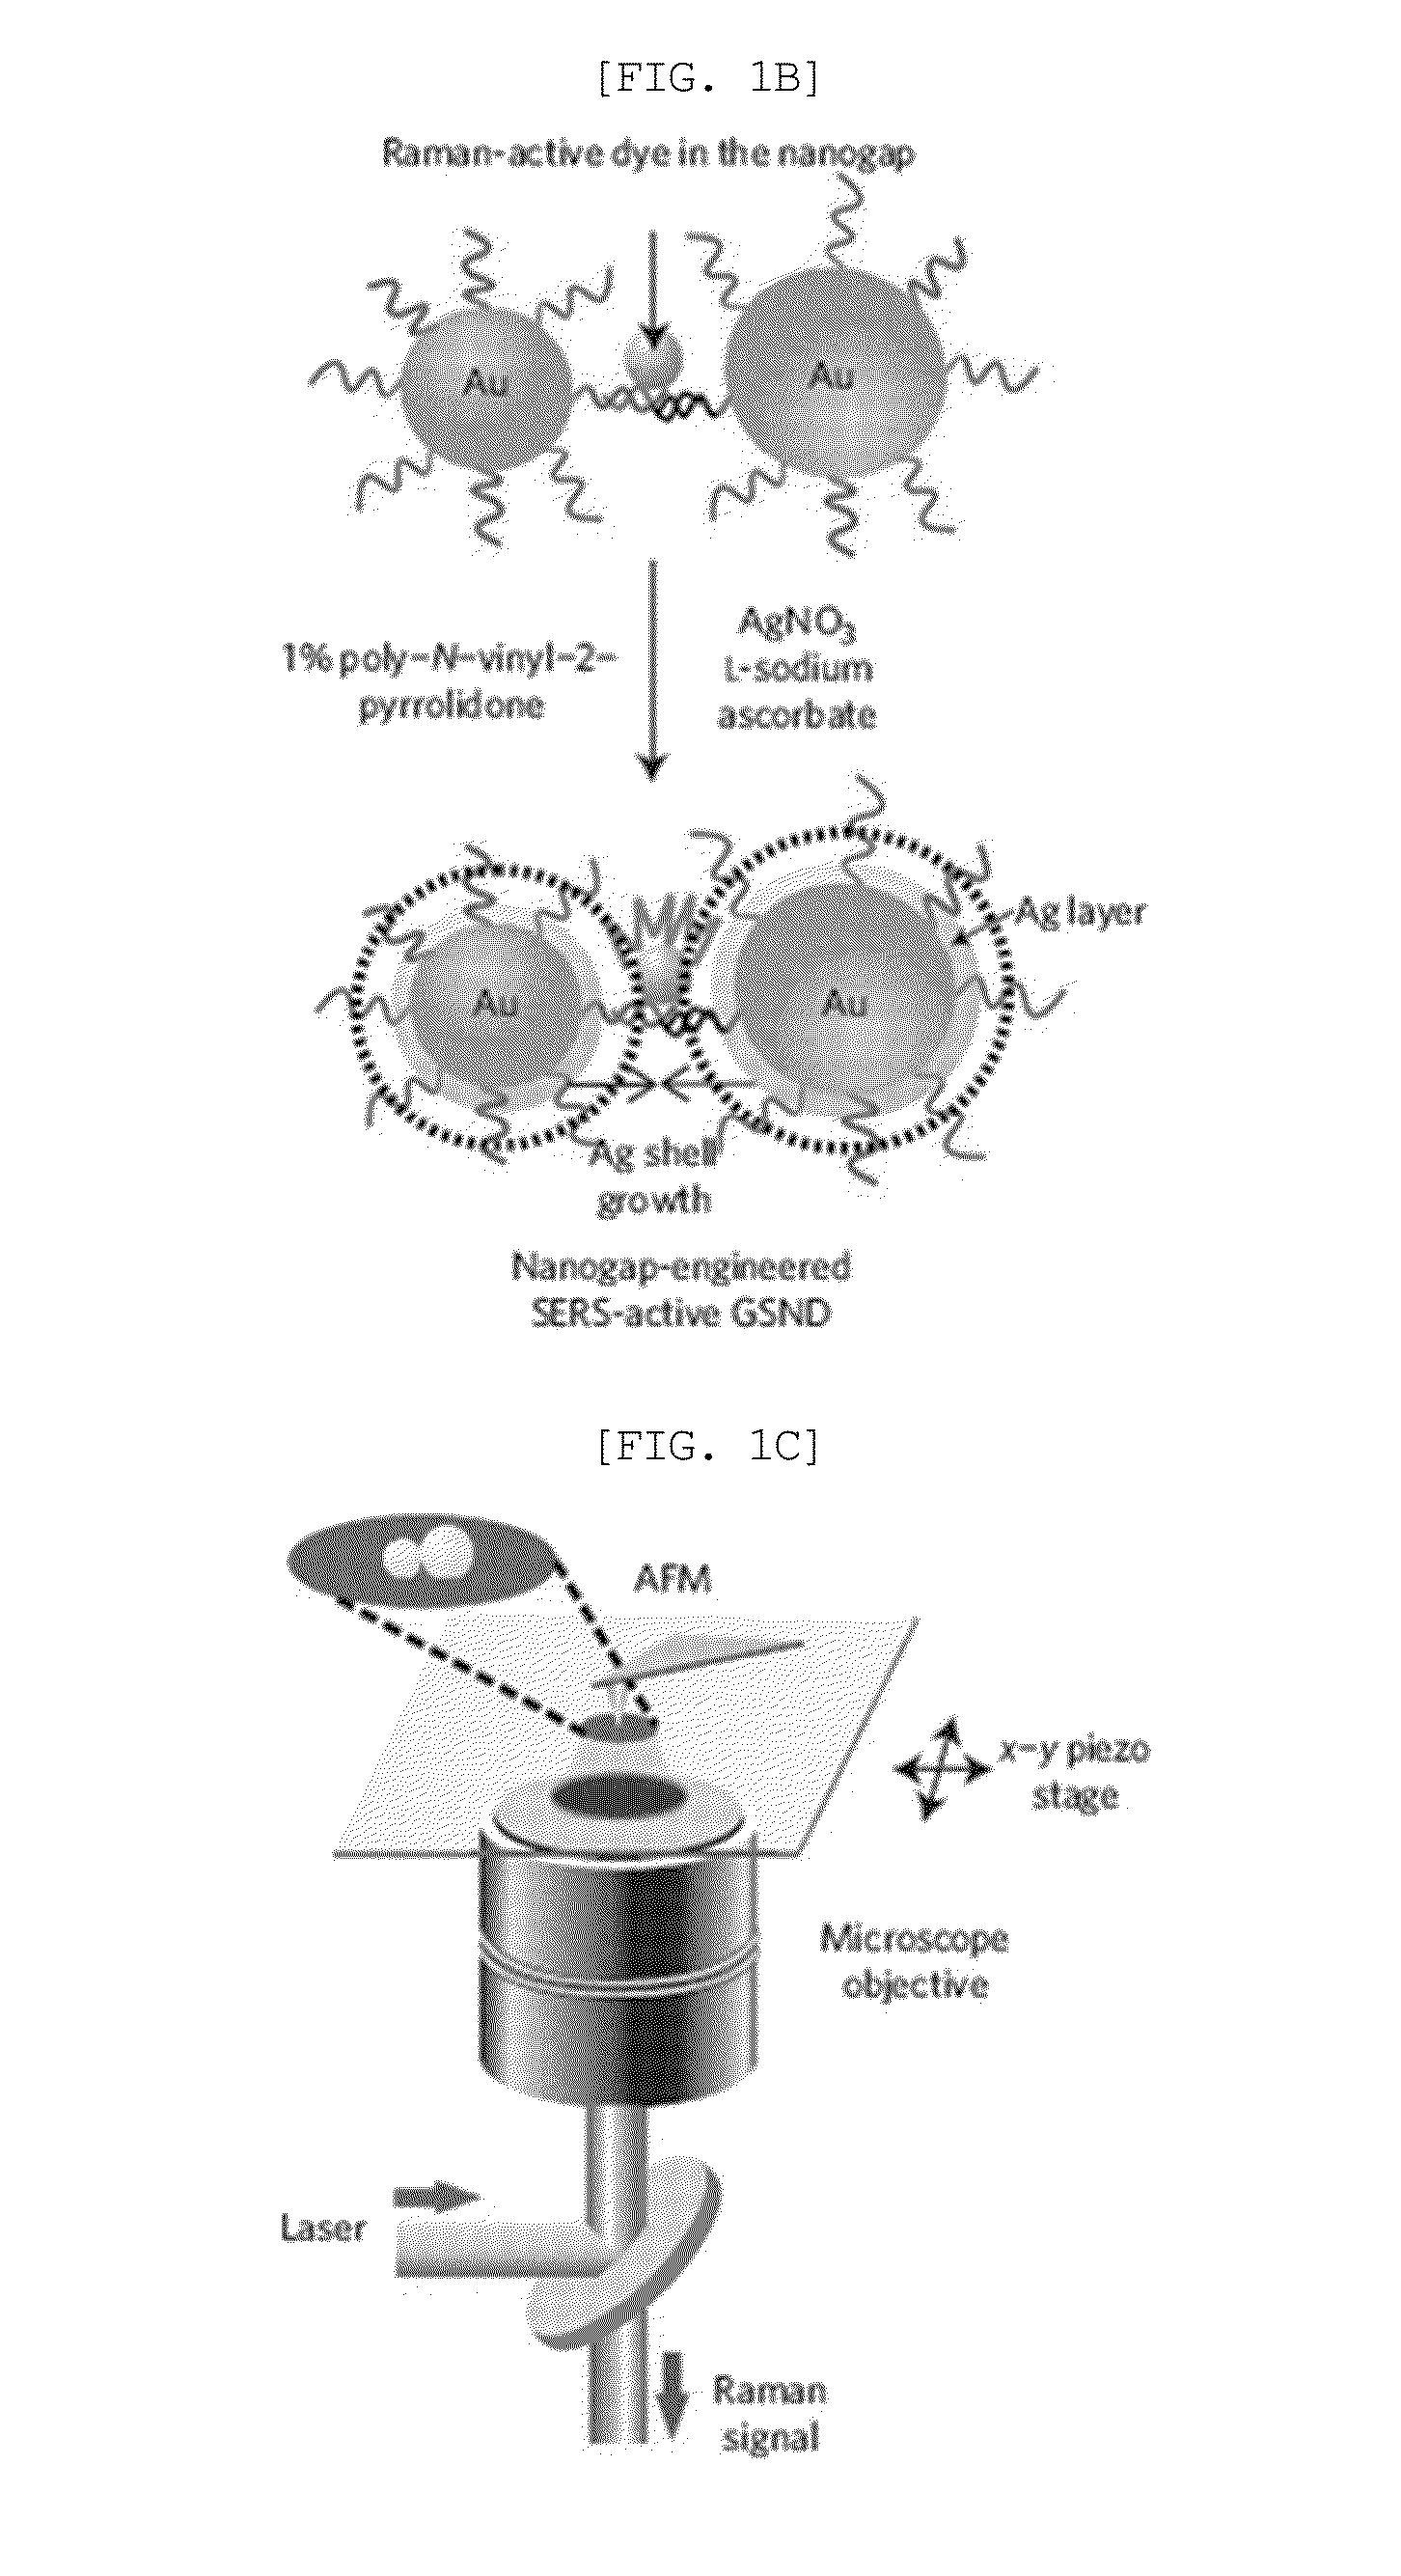 Heterodimeric core-shell nanoparticle in which raman-active molecules are located at a binding portion of a nanoparticle heterodimer, use thereof, and method for preparing same